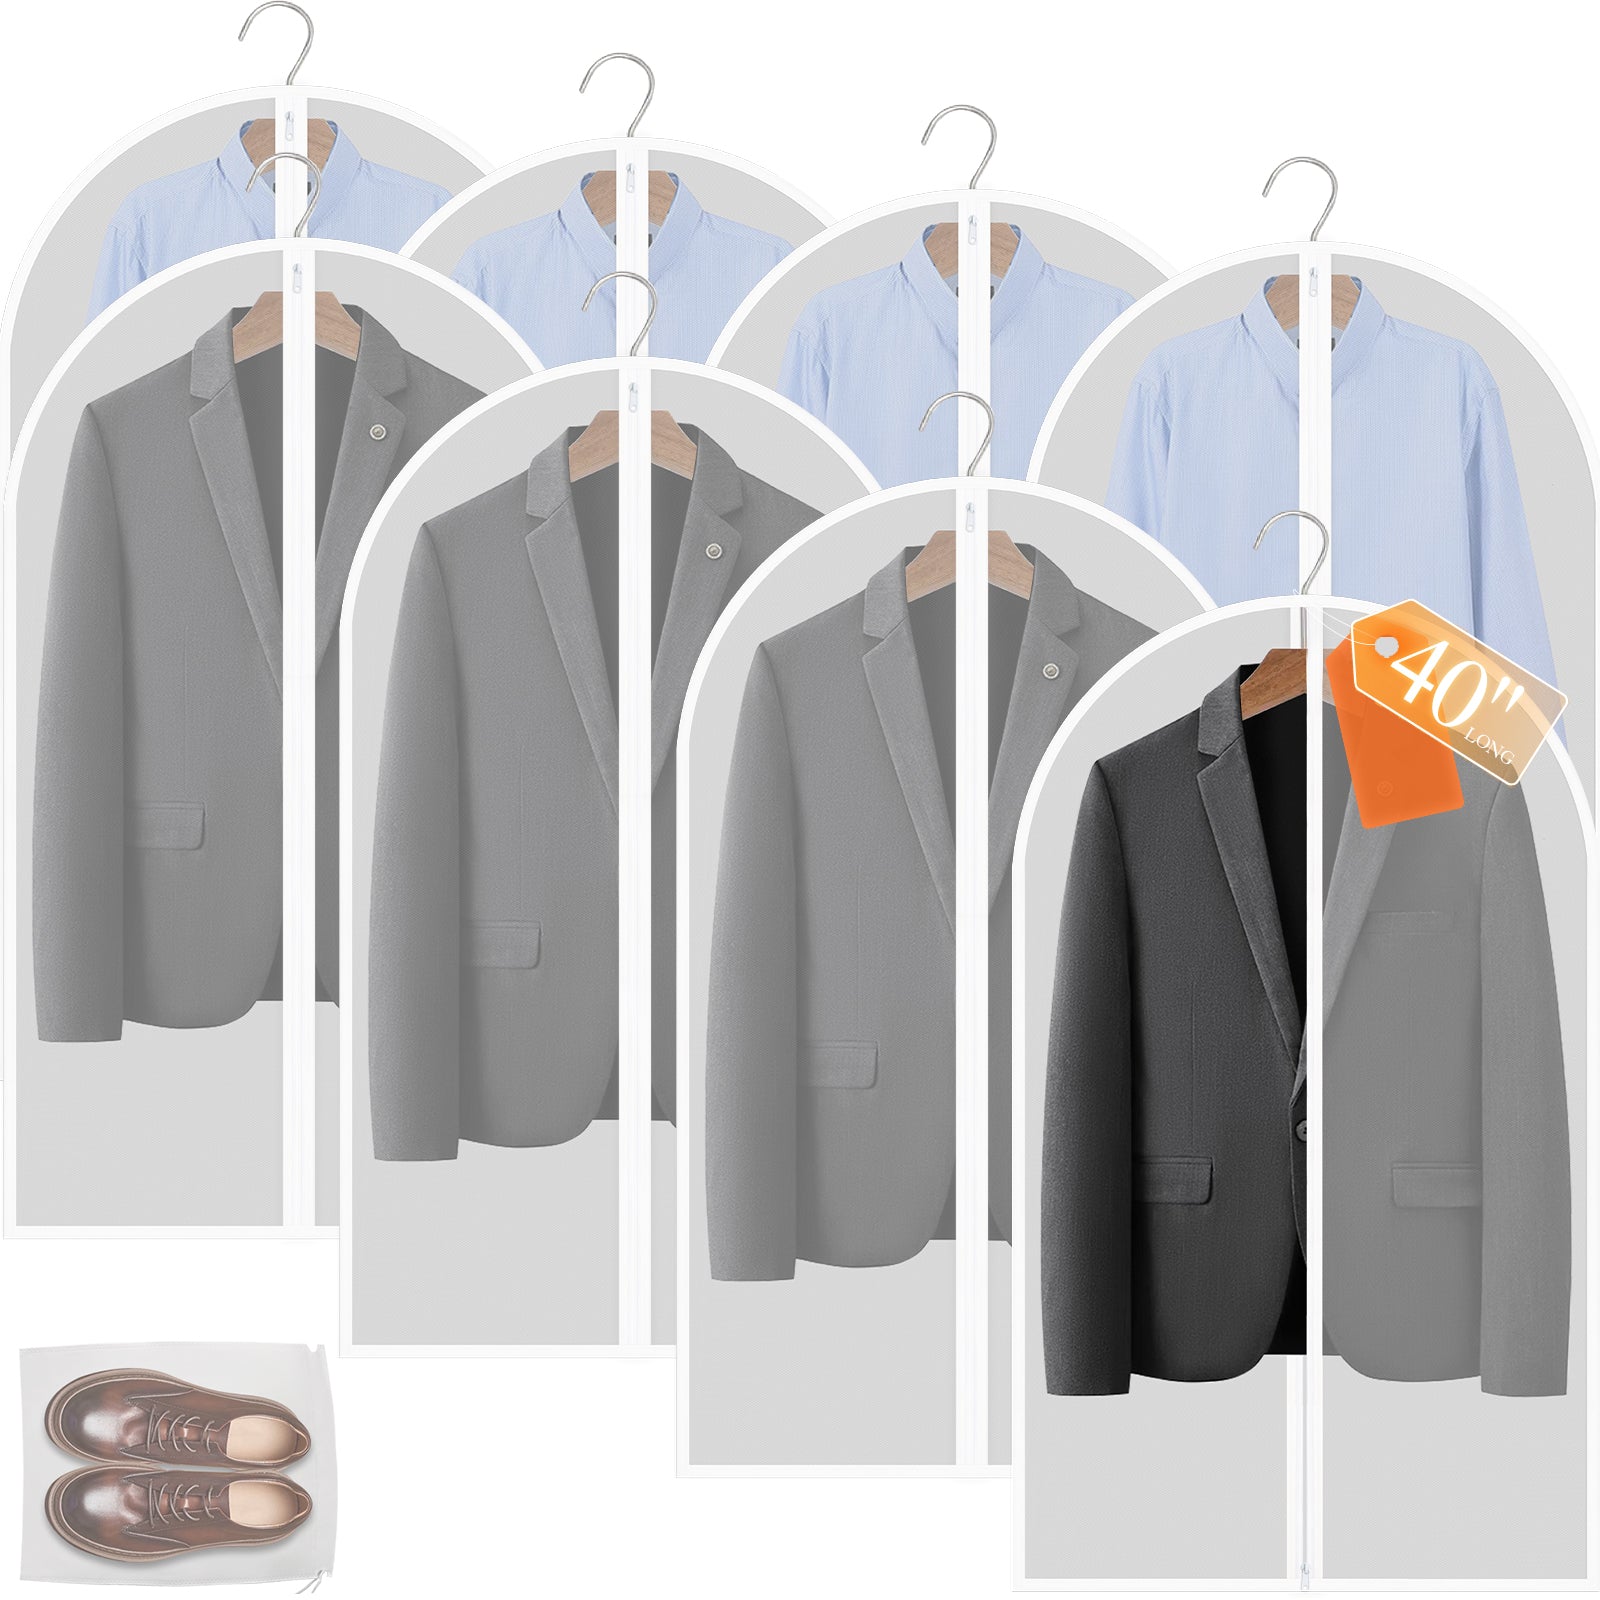 HOTOR Garment Bags - 40'' Garment Bags for Storage, 8-Pack Premium Garment Bags for Hanging Clothes, Dust-Proof Clothes Organizer for Shirts, Coats, Pants, Dresses Storage, Waterproof Garment Covers